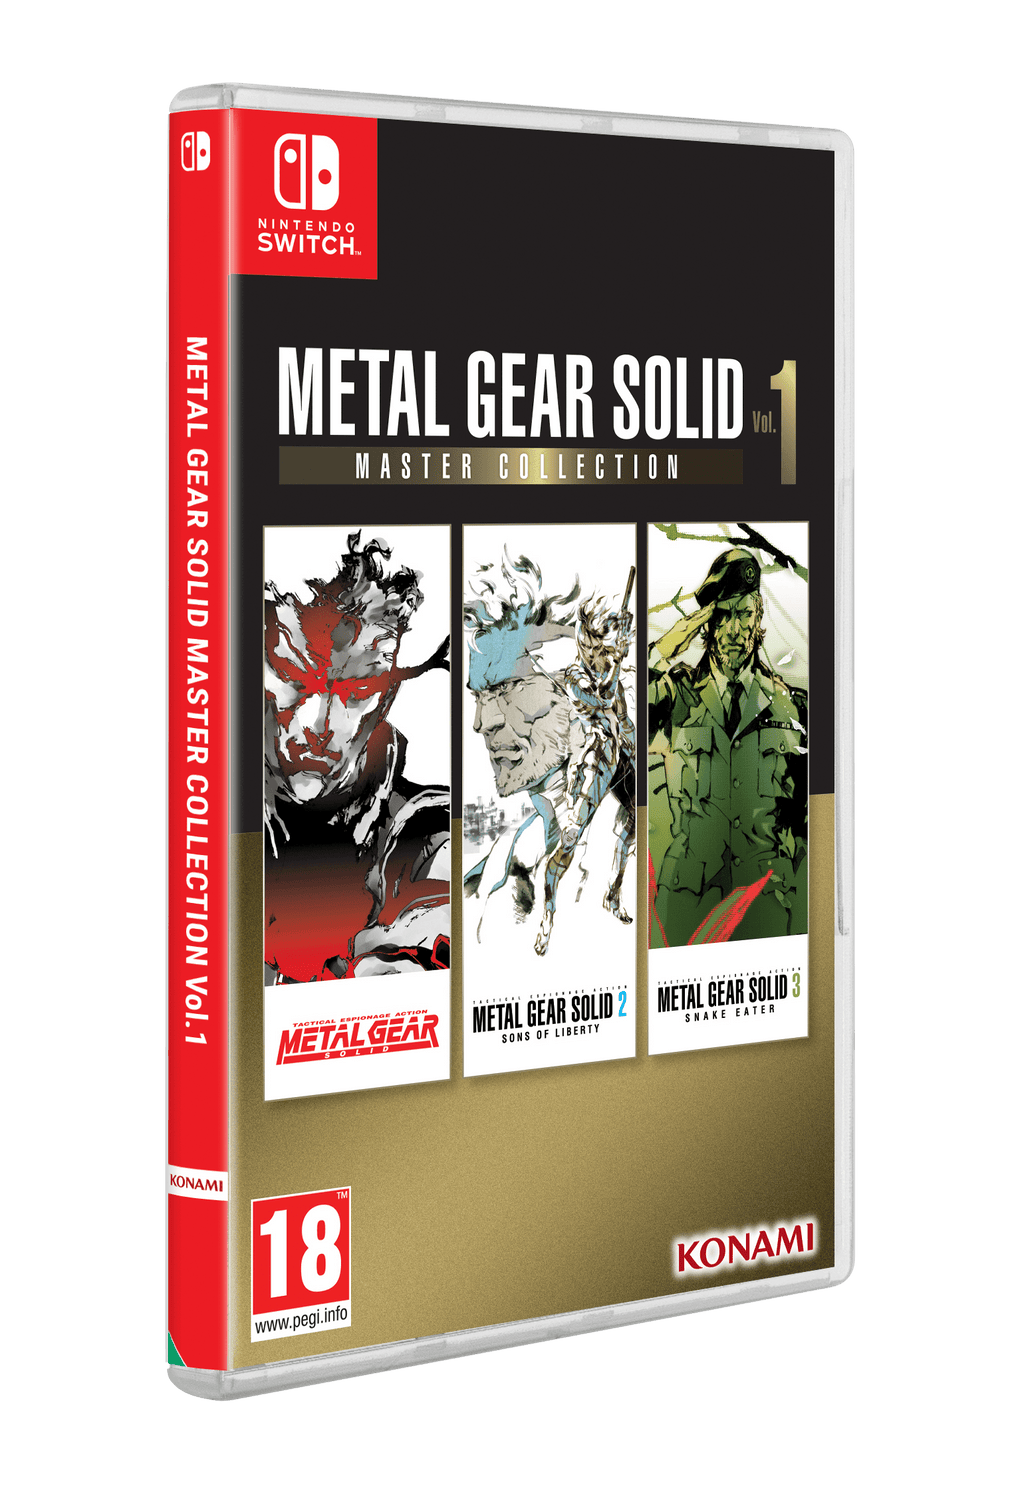 Metal Gear Solid Master Collection Vol 1 Complete Guide: Tips, Tricks,  Strategies and much more (Paperback)